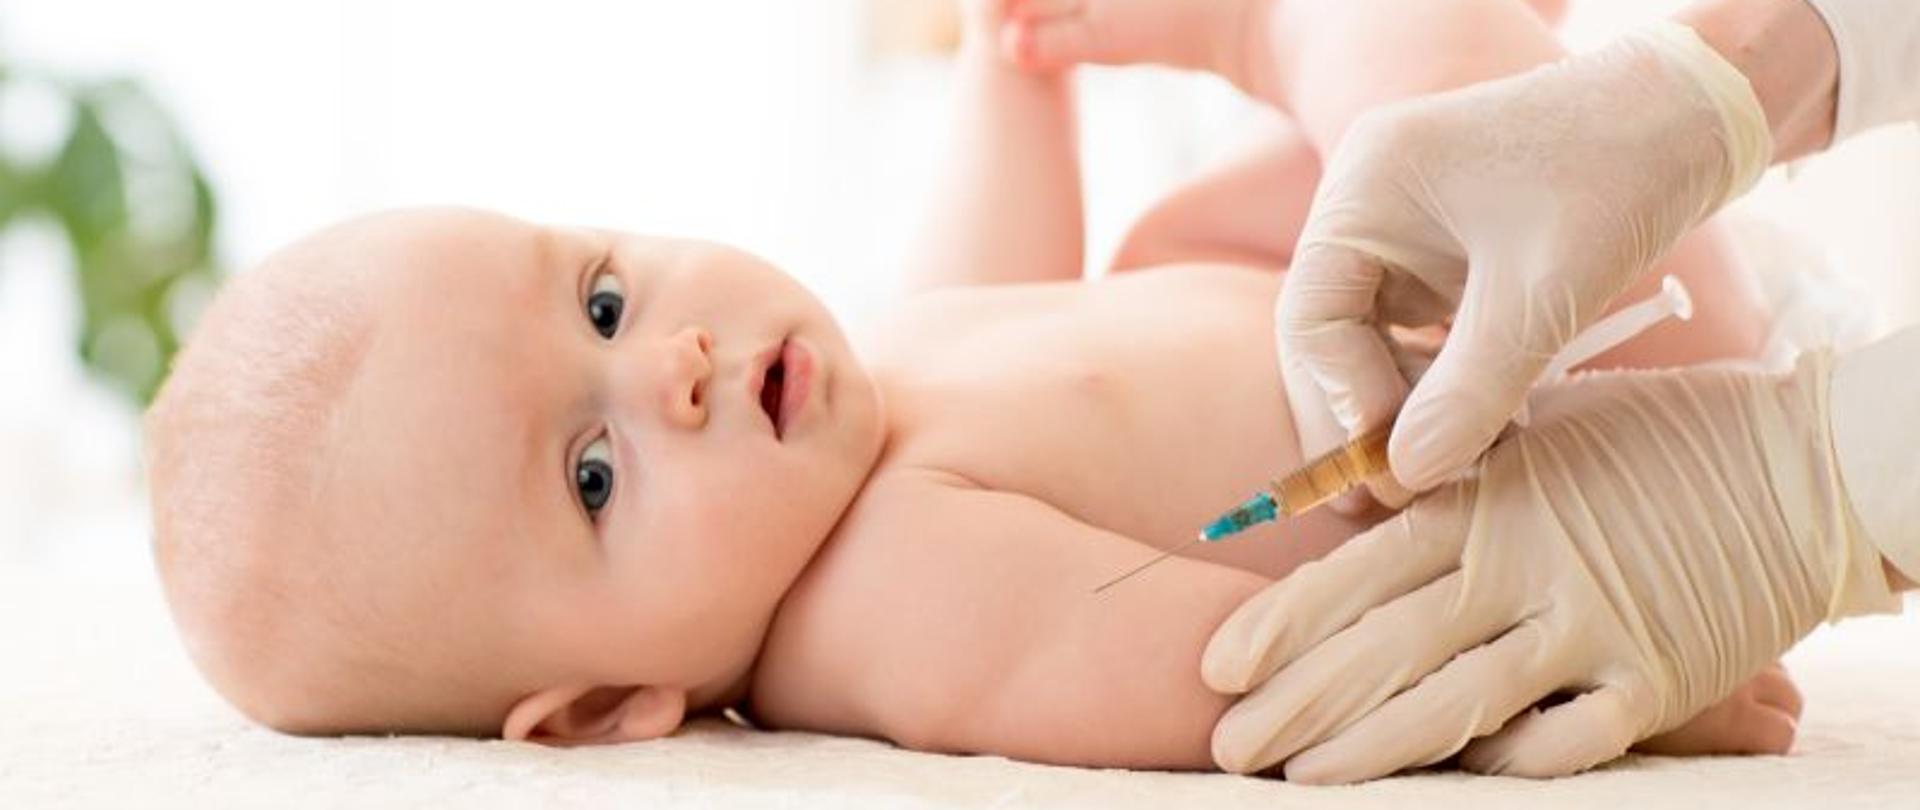 Pediatrics doctor giving baby child vaccine injection